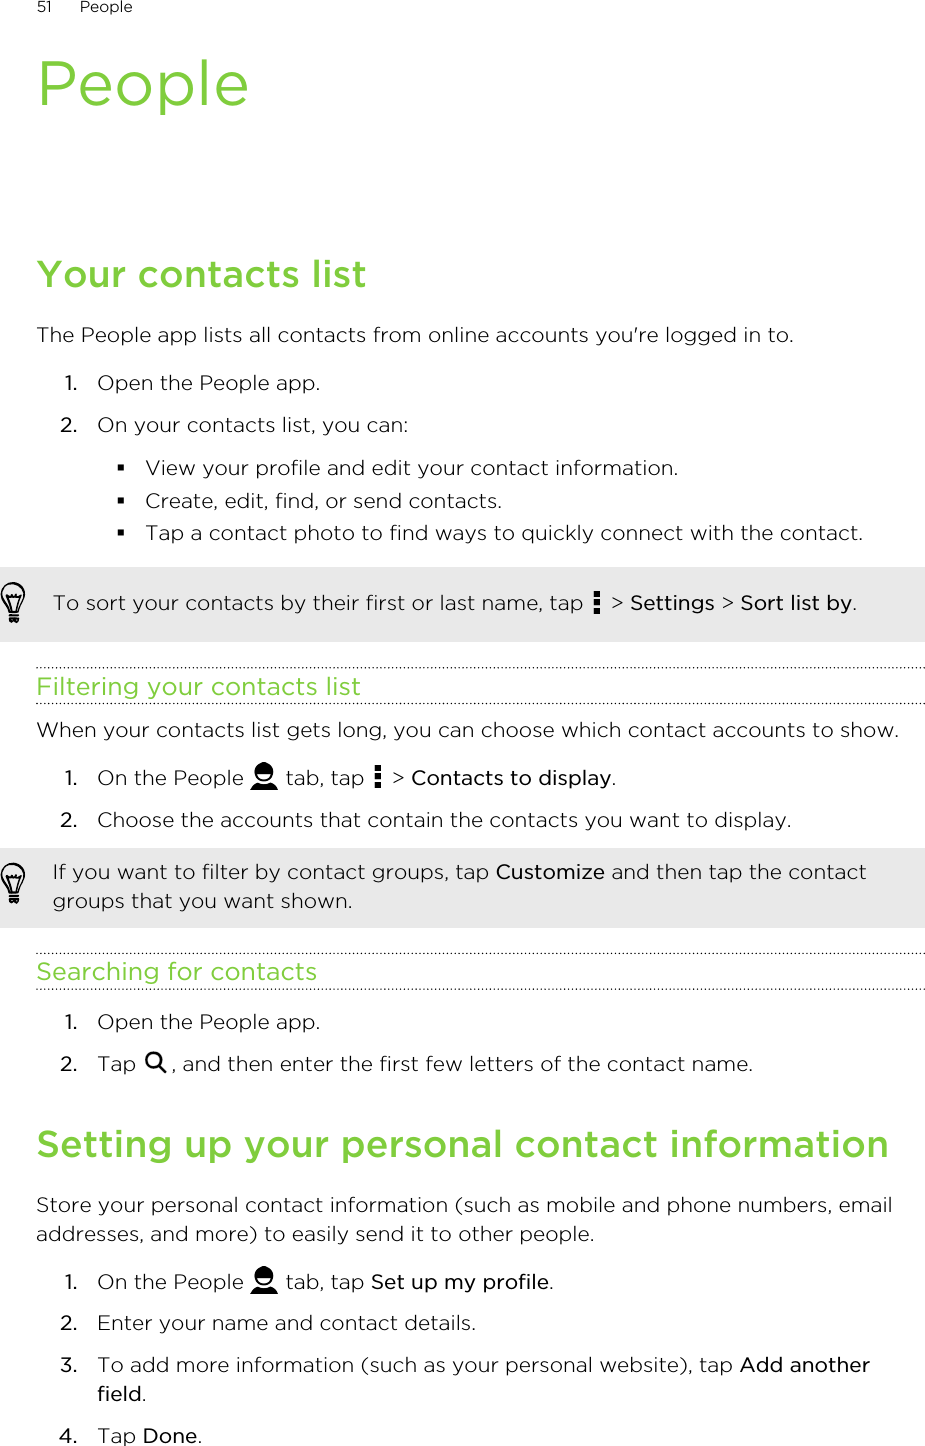 PeopleYour contacts listThe People app lists all contacts from online accounts you&apos;re logged in to.1. Open the People app.2. On your contacts list, you can:§View your profile and edit your contact information.§Create, edit, find, or send contacts.§Tap a contact photo to find ways to quickly connect with the contact.To sort your contacts by their first or last name, tap   &gt; Settings &gt; Sort list by.Filtering your contacts listWhen your contacts list gets long, you can choose which contact accounts to show.1. On the People   tab, tap   &gt; Contacts to display.2. Choose the accounts that contain the contacts you want to display. If you want to filter by contact groups, tap Customize and then tap the contactgroups that you want shown.Searching for contacts1. Open the People app.2. Tap  , and then enter the first few letters of the contact name.Setting up your personal contact informationStore your personal contact information (such as mobile and phone numbers, emailaddresses, and more) to easily send it to other people.1. On the People   tab, tap Set up my profile.2. Enter your name and contact details.3. To add more information (such as your personal website), tap Add anotherfield.4. Tap Done.51 People